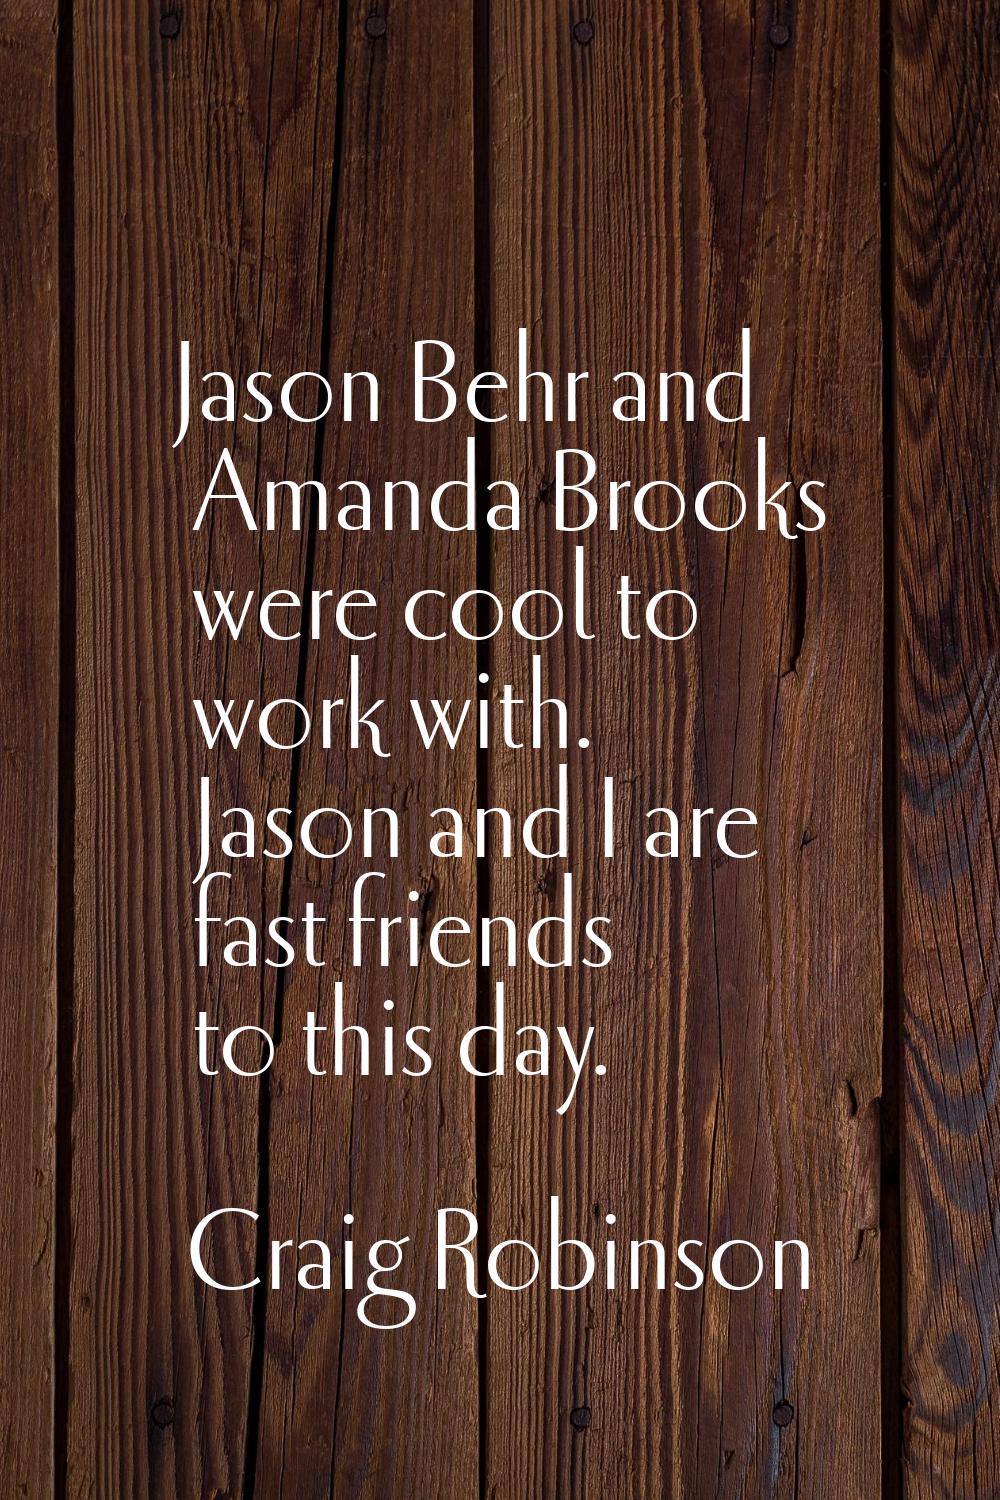 Jason Behr and Amanda Brooks were cool to work with. Jason and I are fast friends to this day.